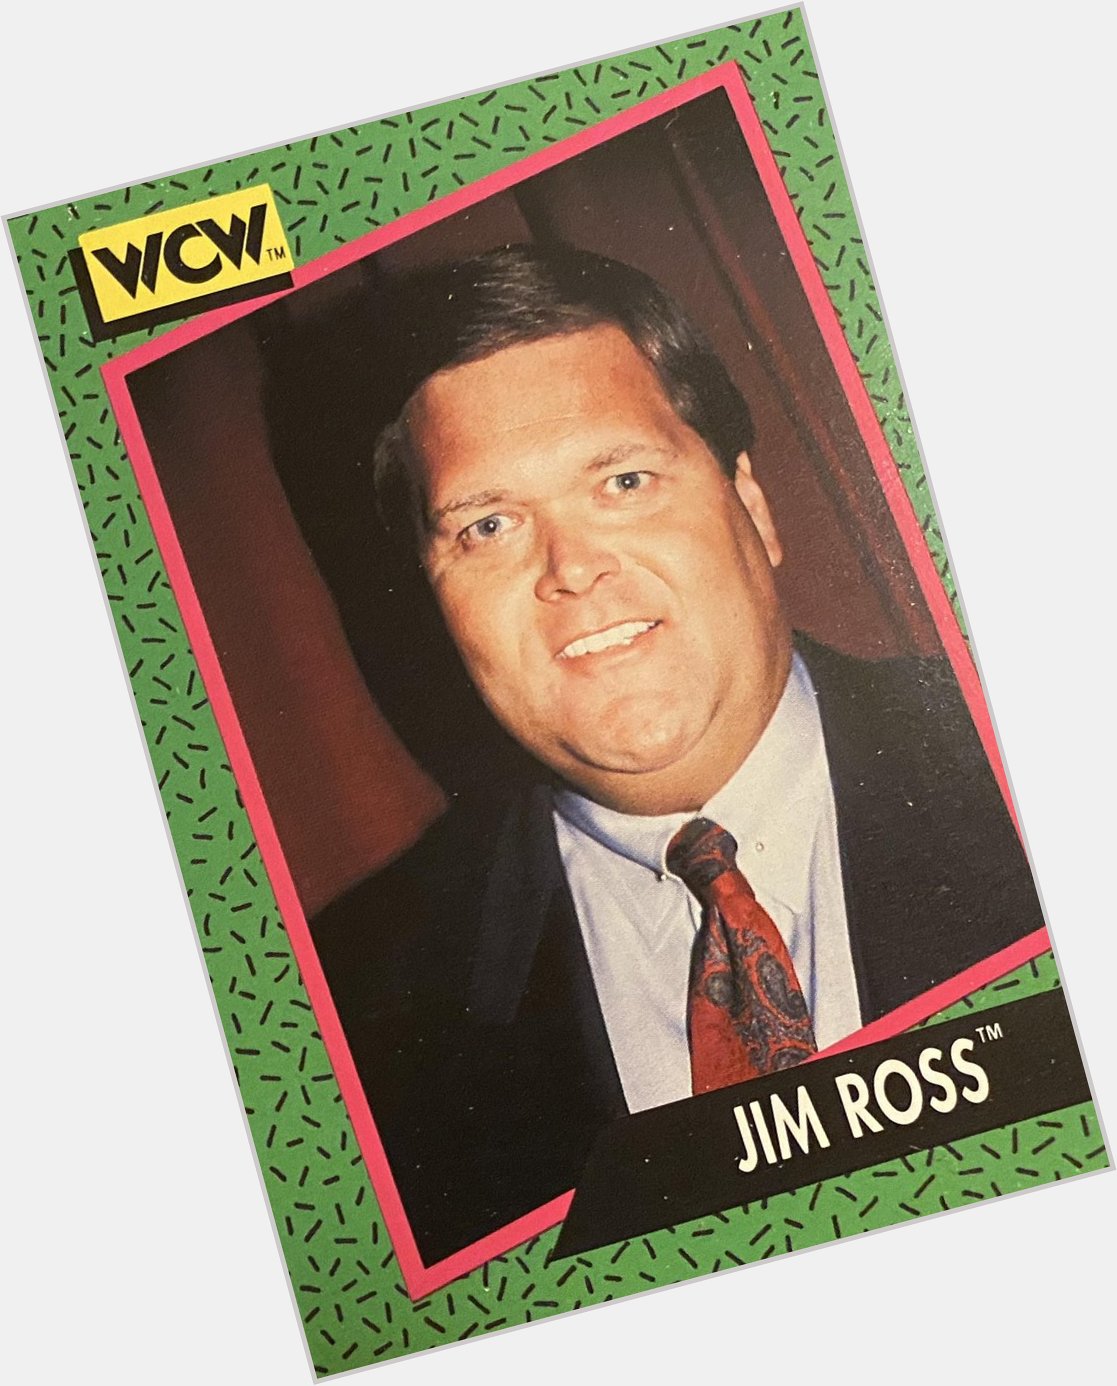 BAH GAWD! HAPPY BIRTHDAY wishes go out to Jim Ross!! 